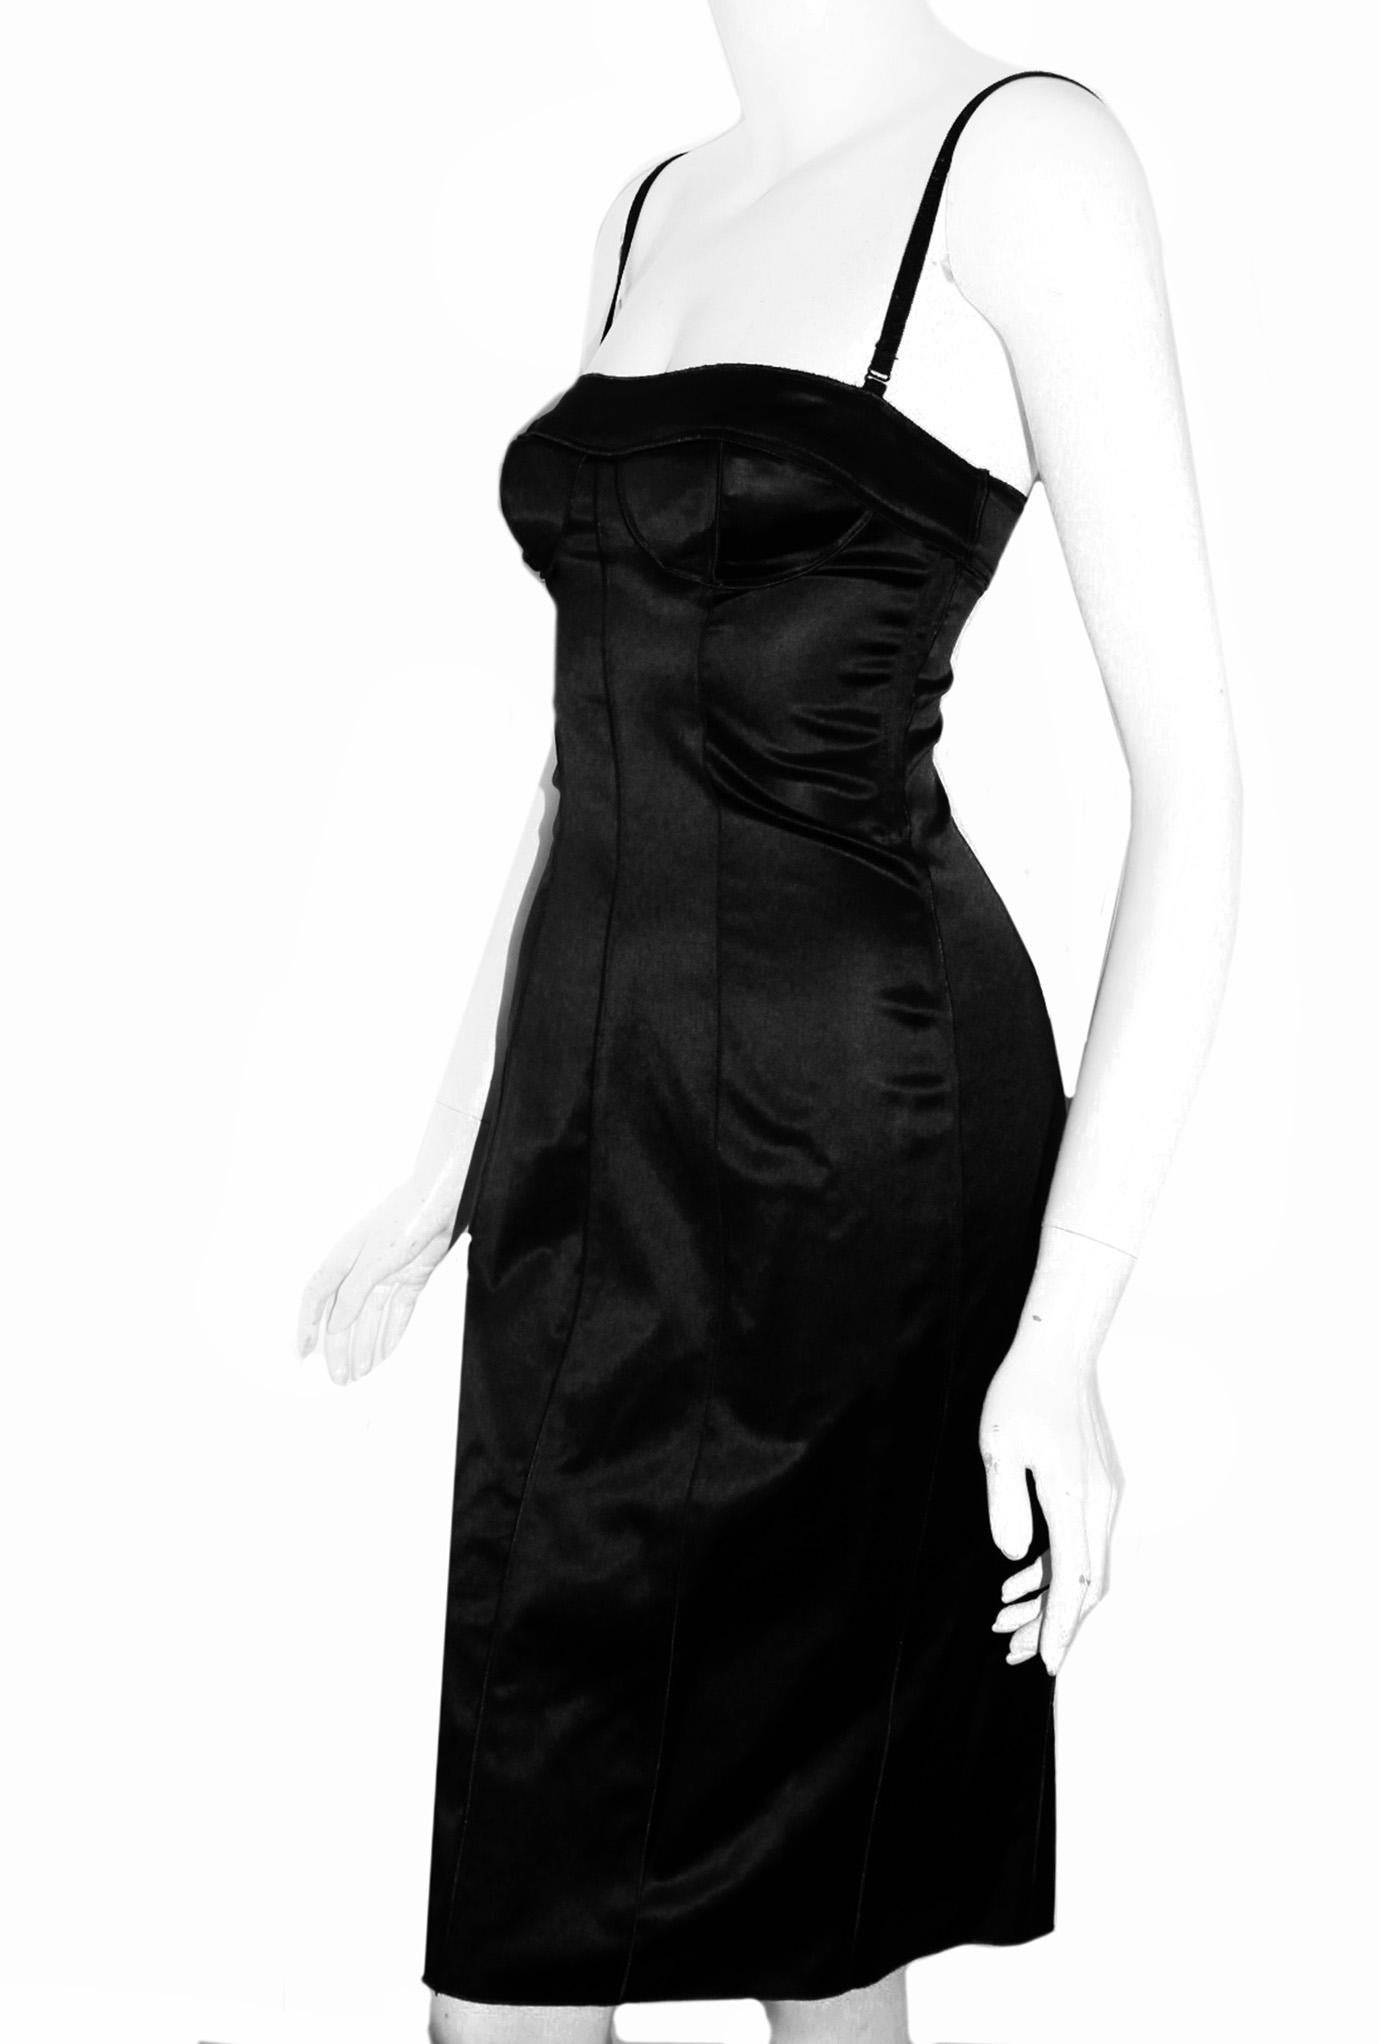 D & G  Black Satin  Structure Form Fitting Dress In Excellent Condition For Sale In Palm Beach, FL